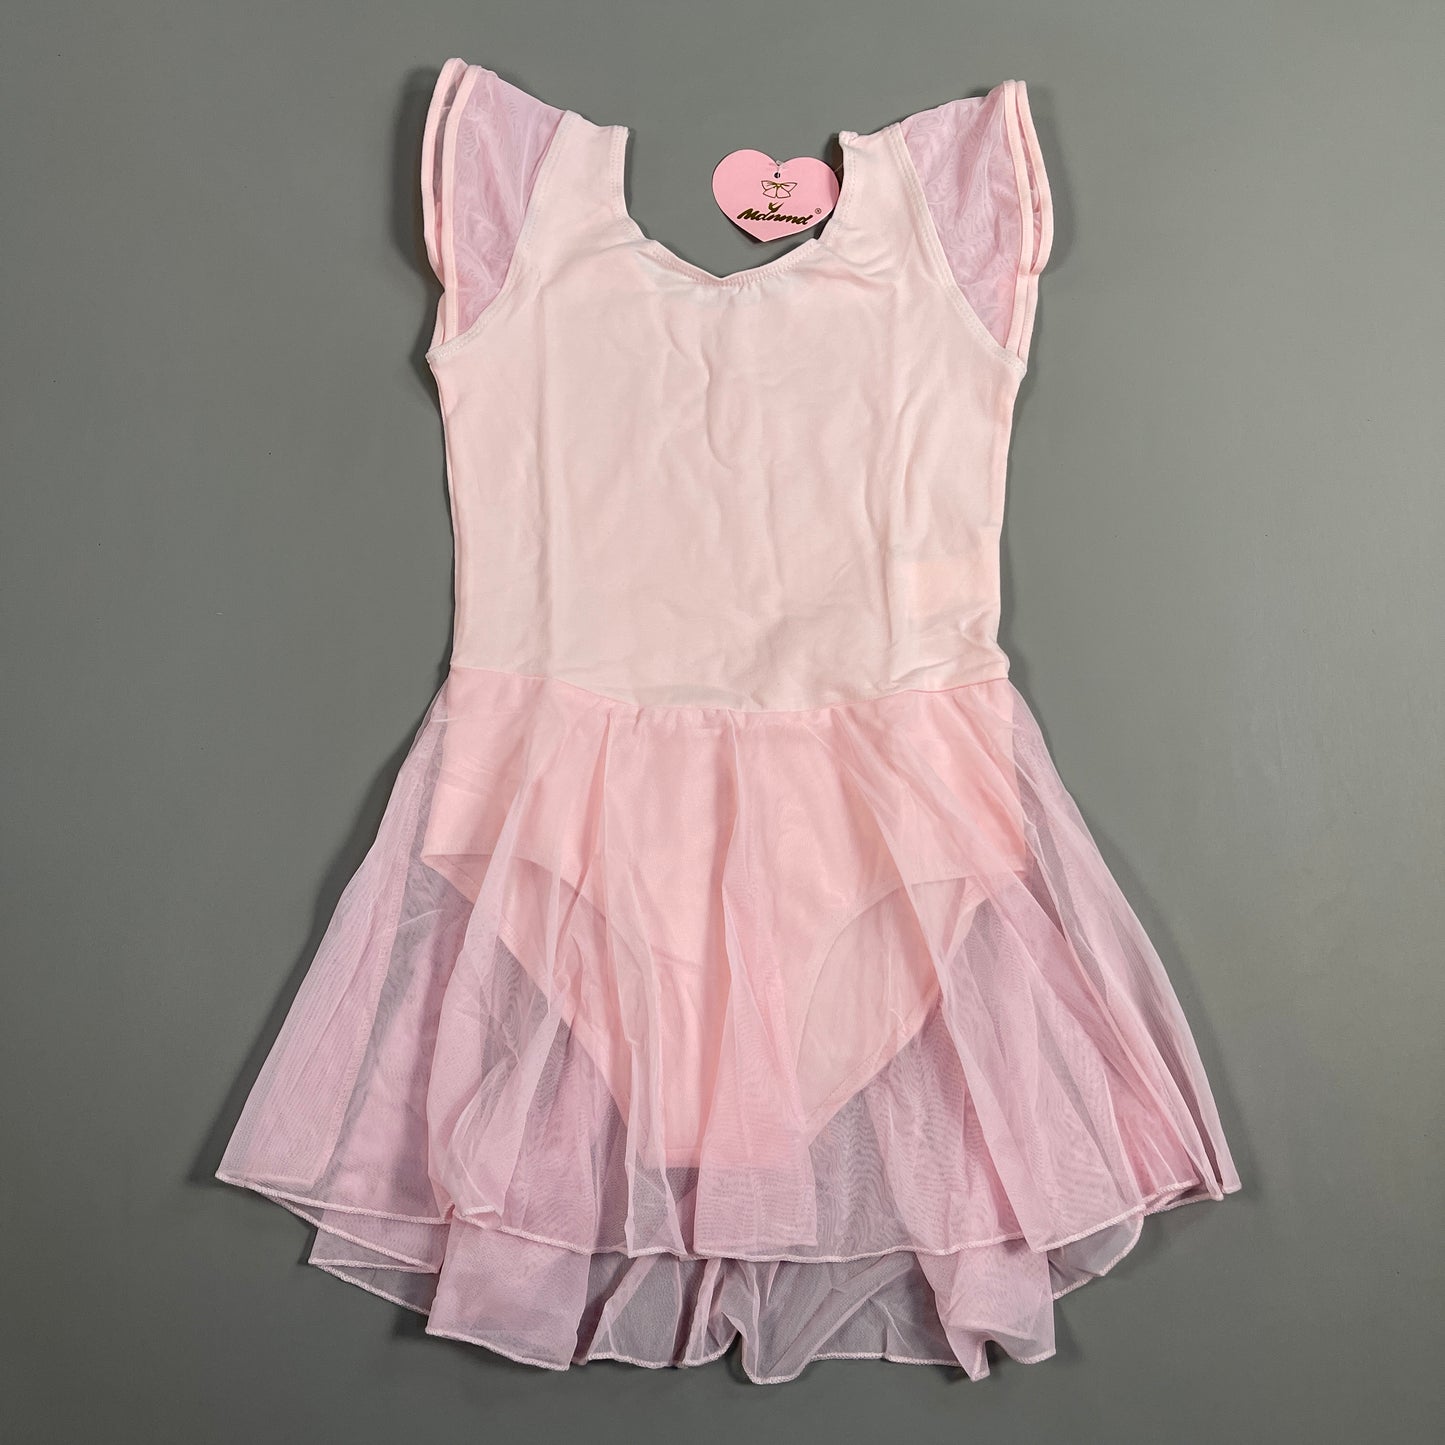 MDNMD Toddler Girls Ballet, Dance, Gymnastic, Leotard Flutter Sleeve Outfit With Skirt Sz 10 Pink (New)